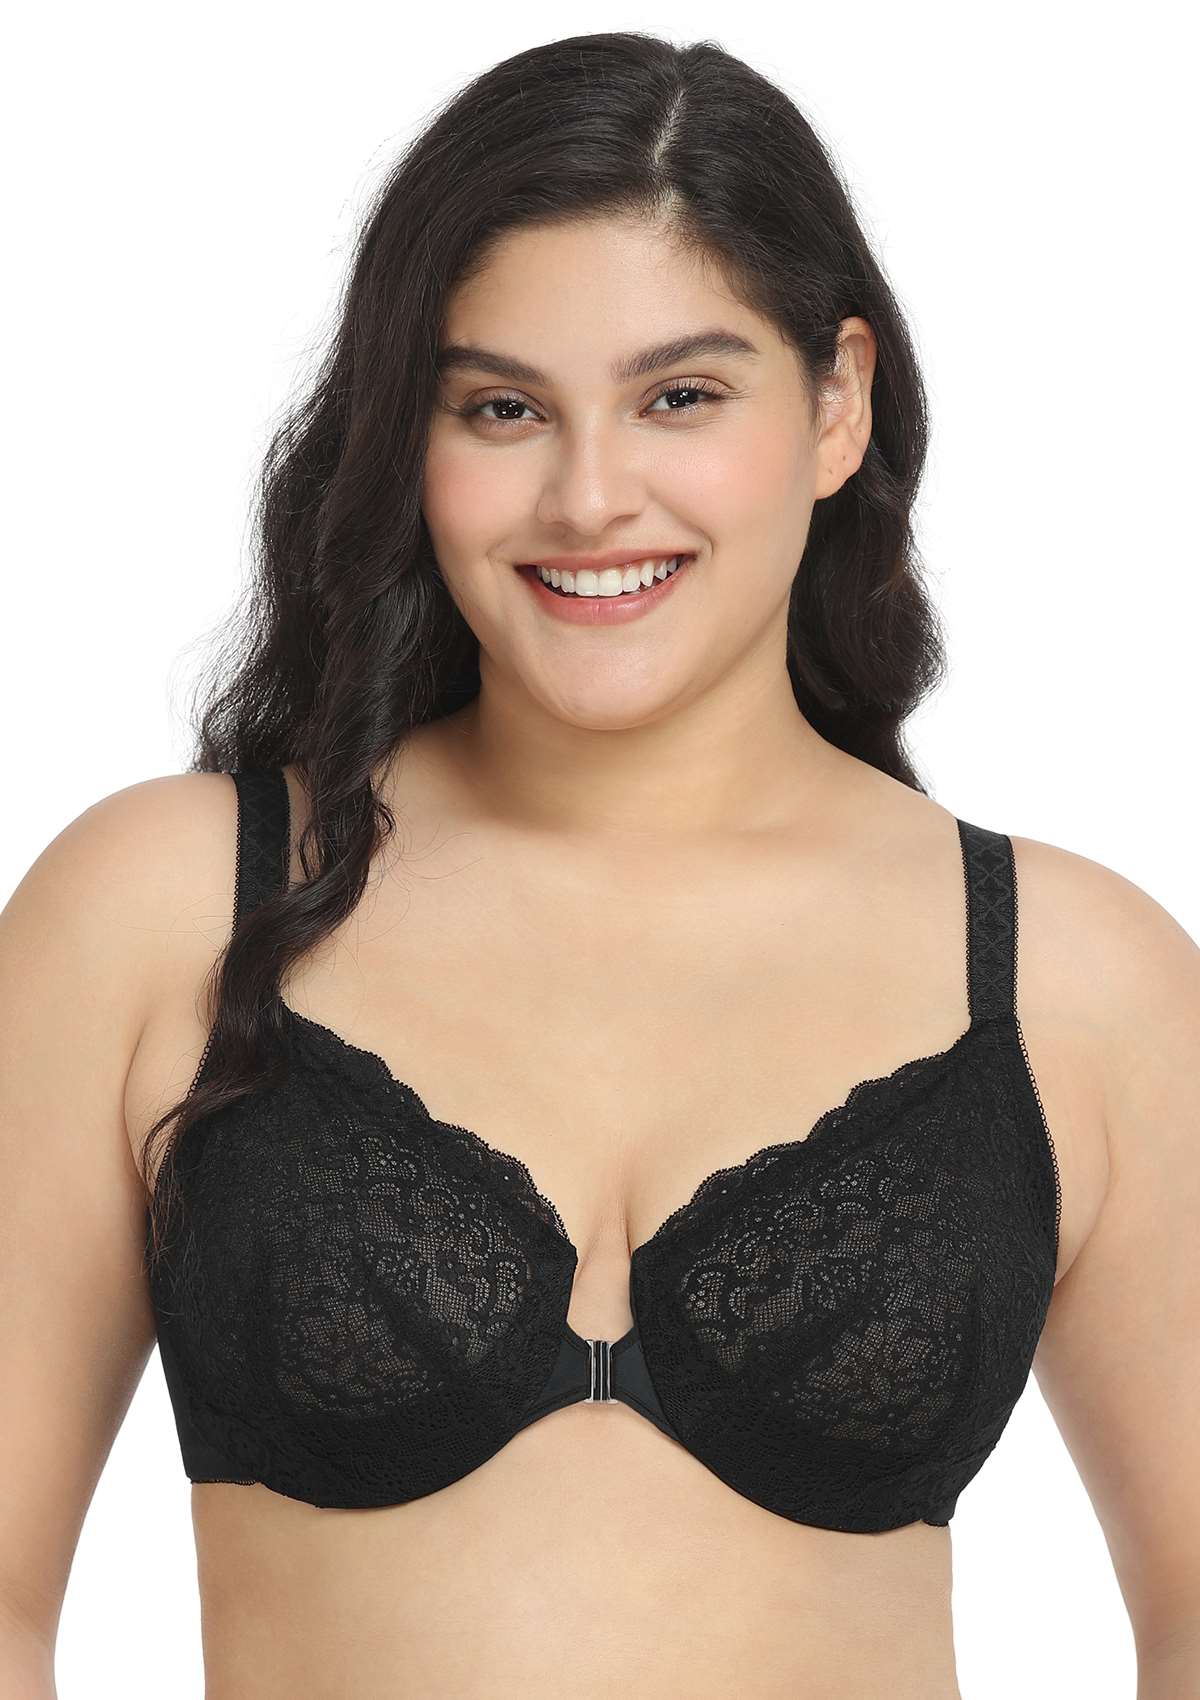 HSIA Nymphaea Front-Close Unlined Retro Floral Lace Back Smoothing Bra - Black / 40 / C